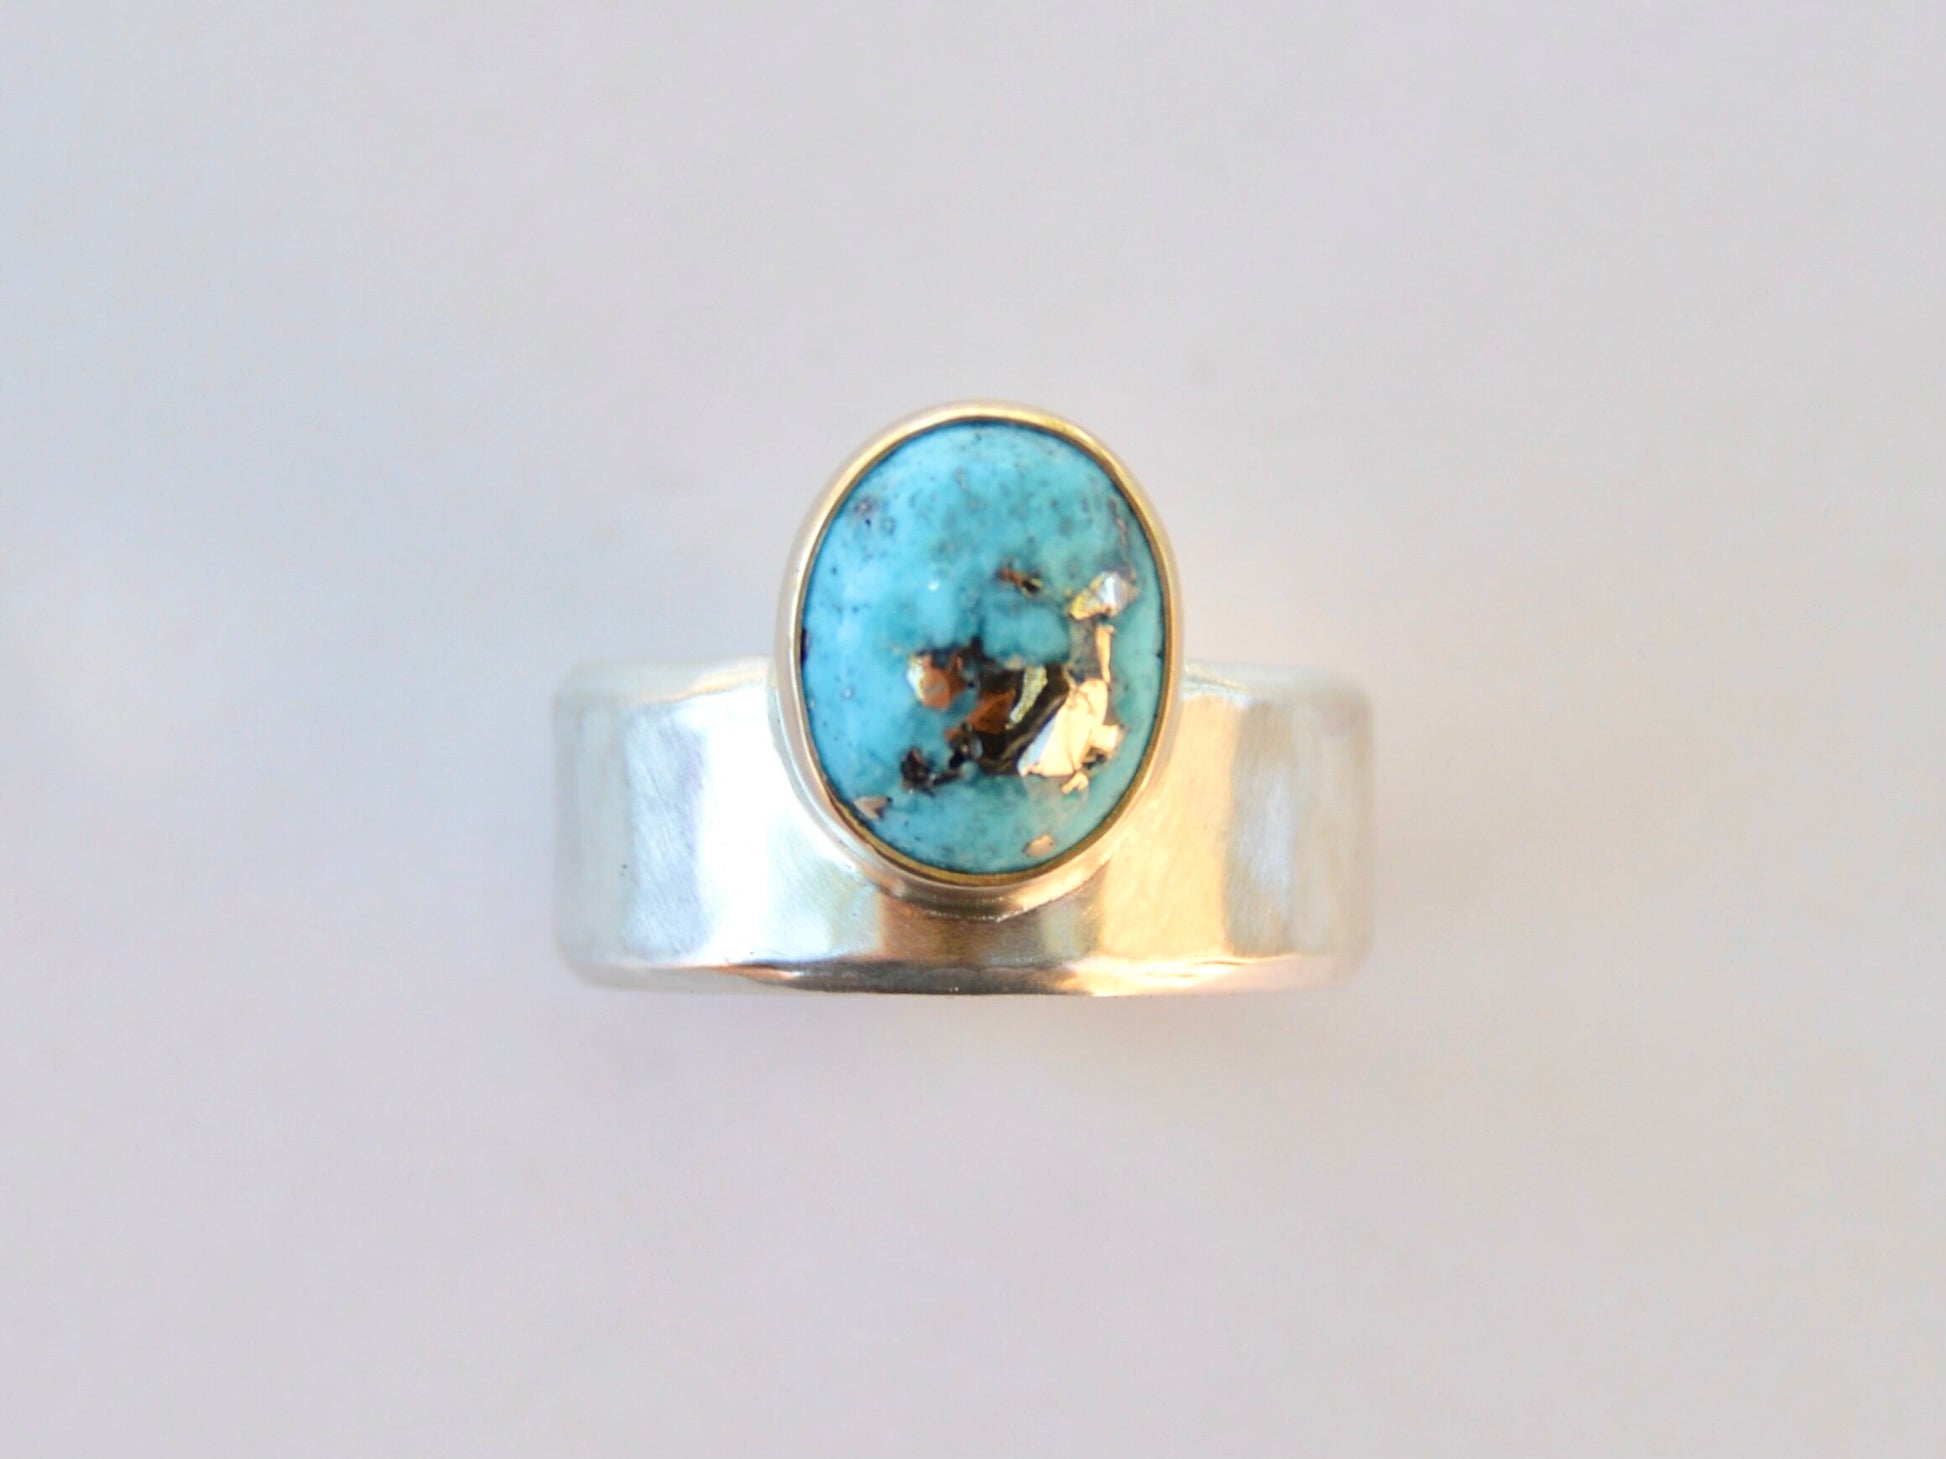 Made by hand in Northern New Mexico using recycled metals and responsibly sourced stones. This ring features a large cabochon Persian Turquoise stone set in a 14k yellow Gold bezel on a wide Sterling Silver band with matte finish.    Mesa Ring by Halcyon Jewelry.